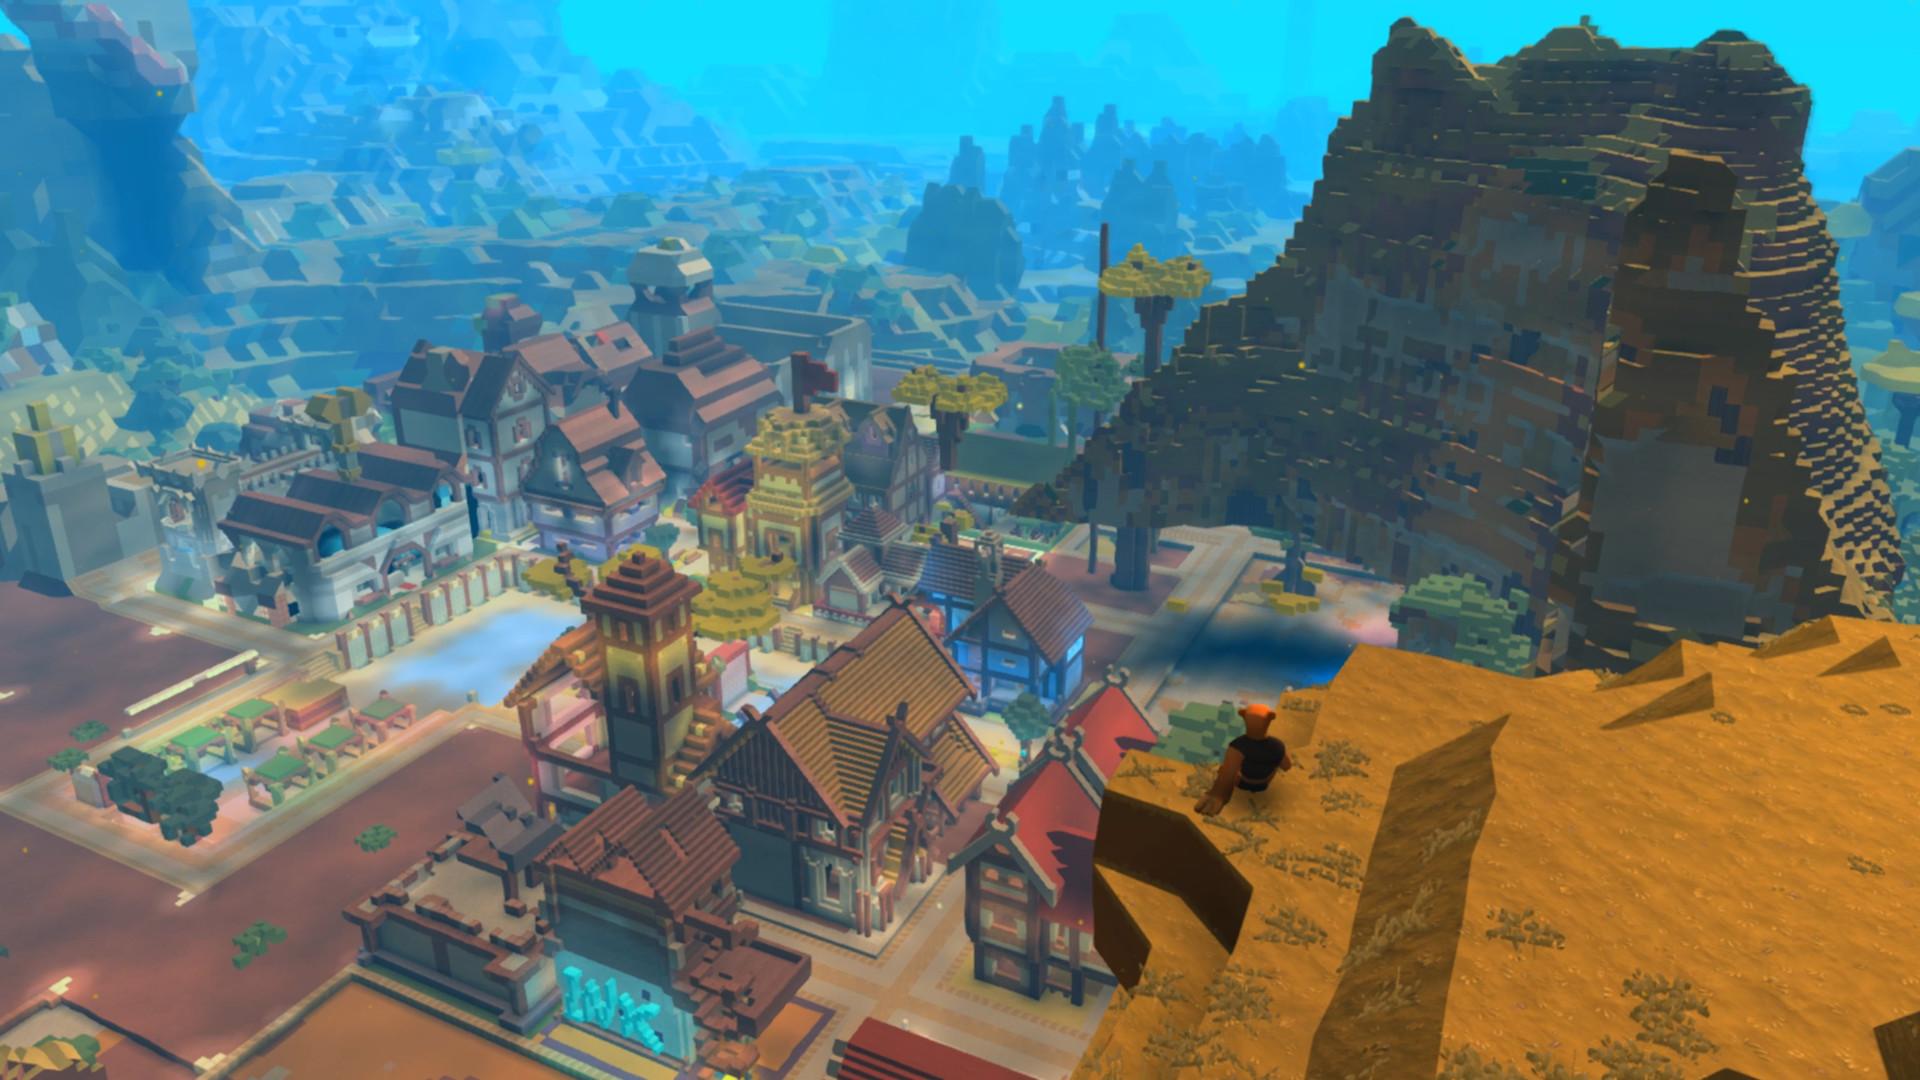 Screenshot №24 from game Boundless